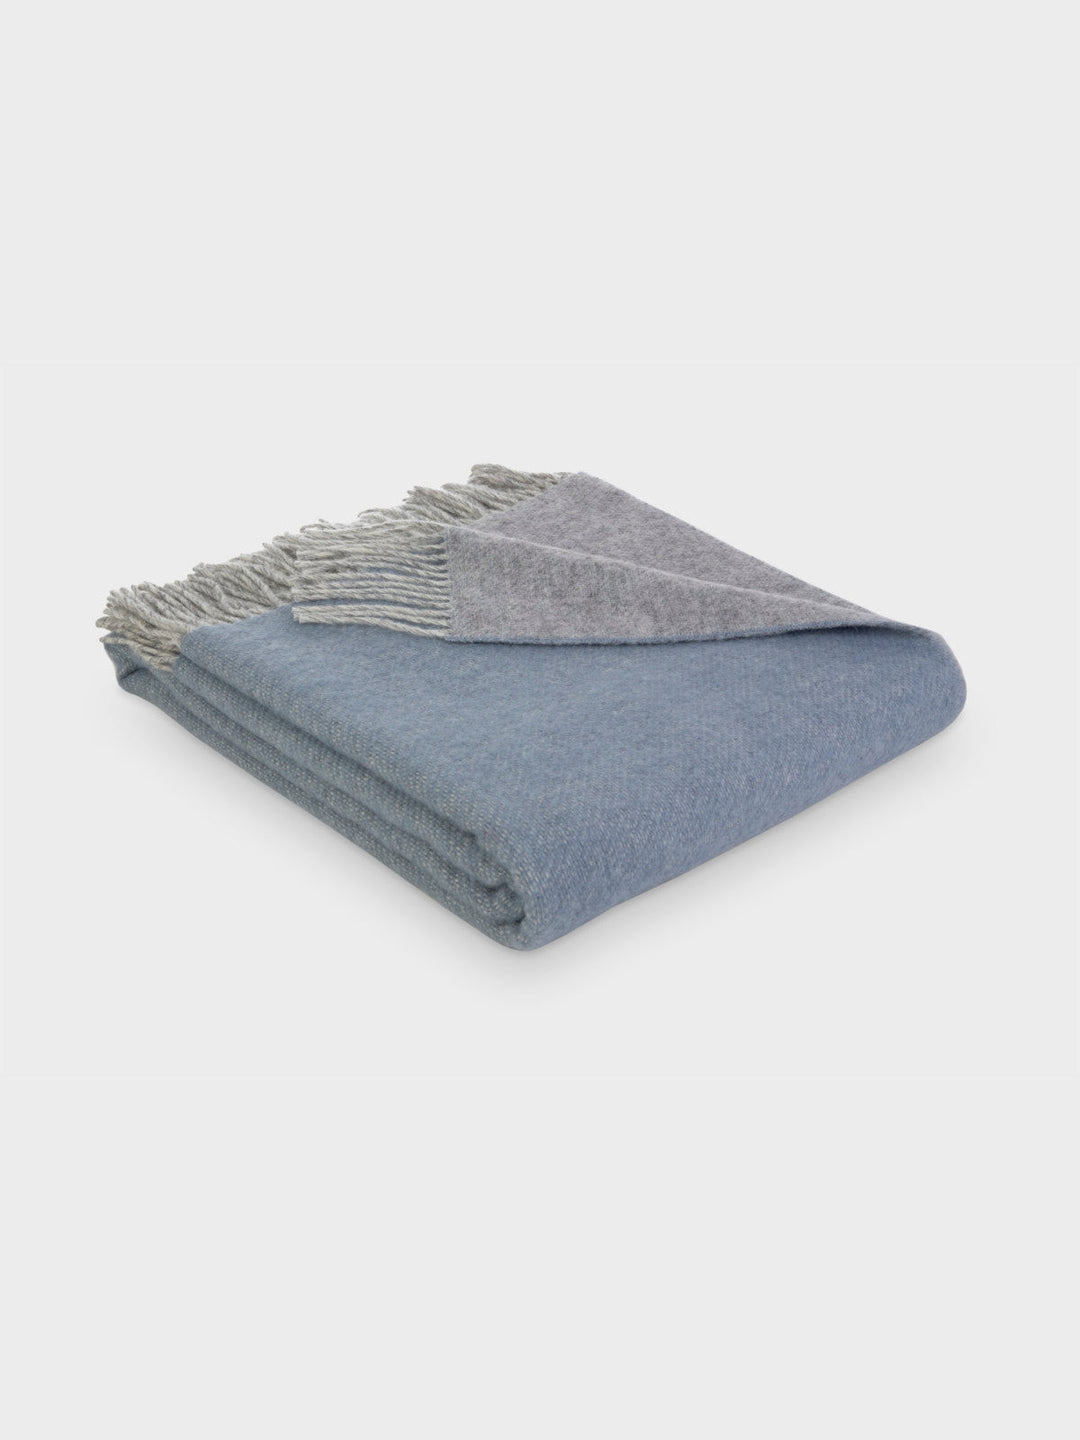 Folded blue and grey reversible wool throw blanket by The British Blanket Company